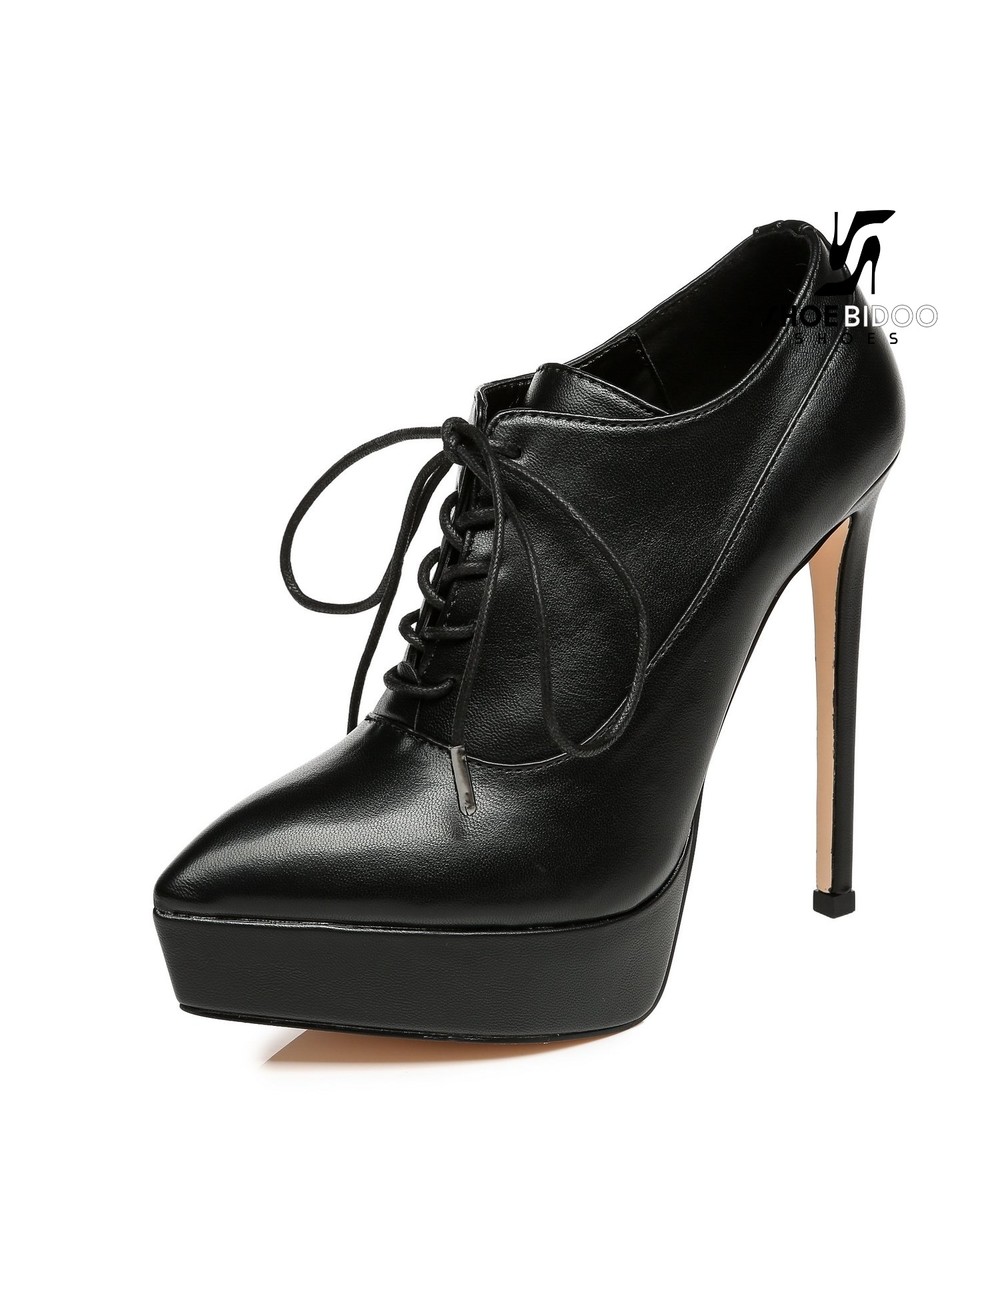 Giaro Giaro Platform lace up pumps SNUG in black with red lining